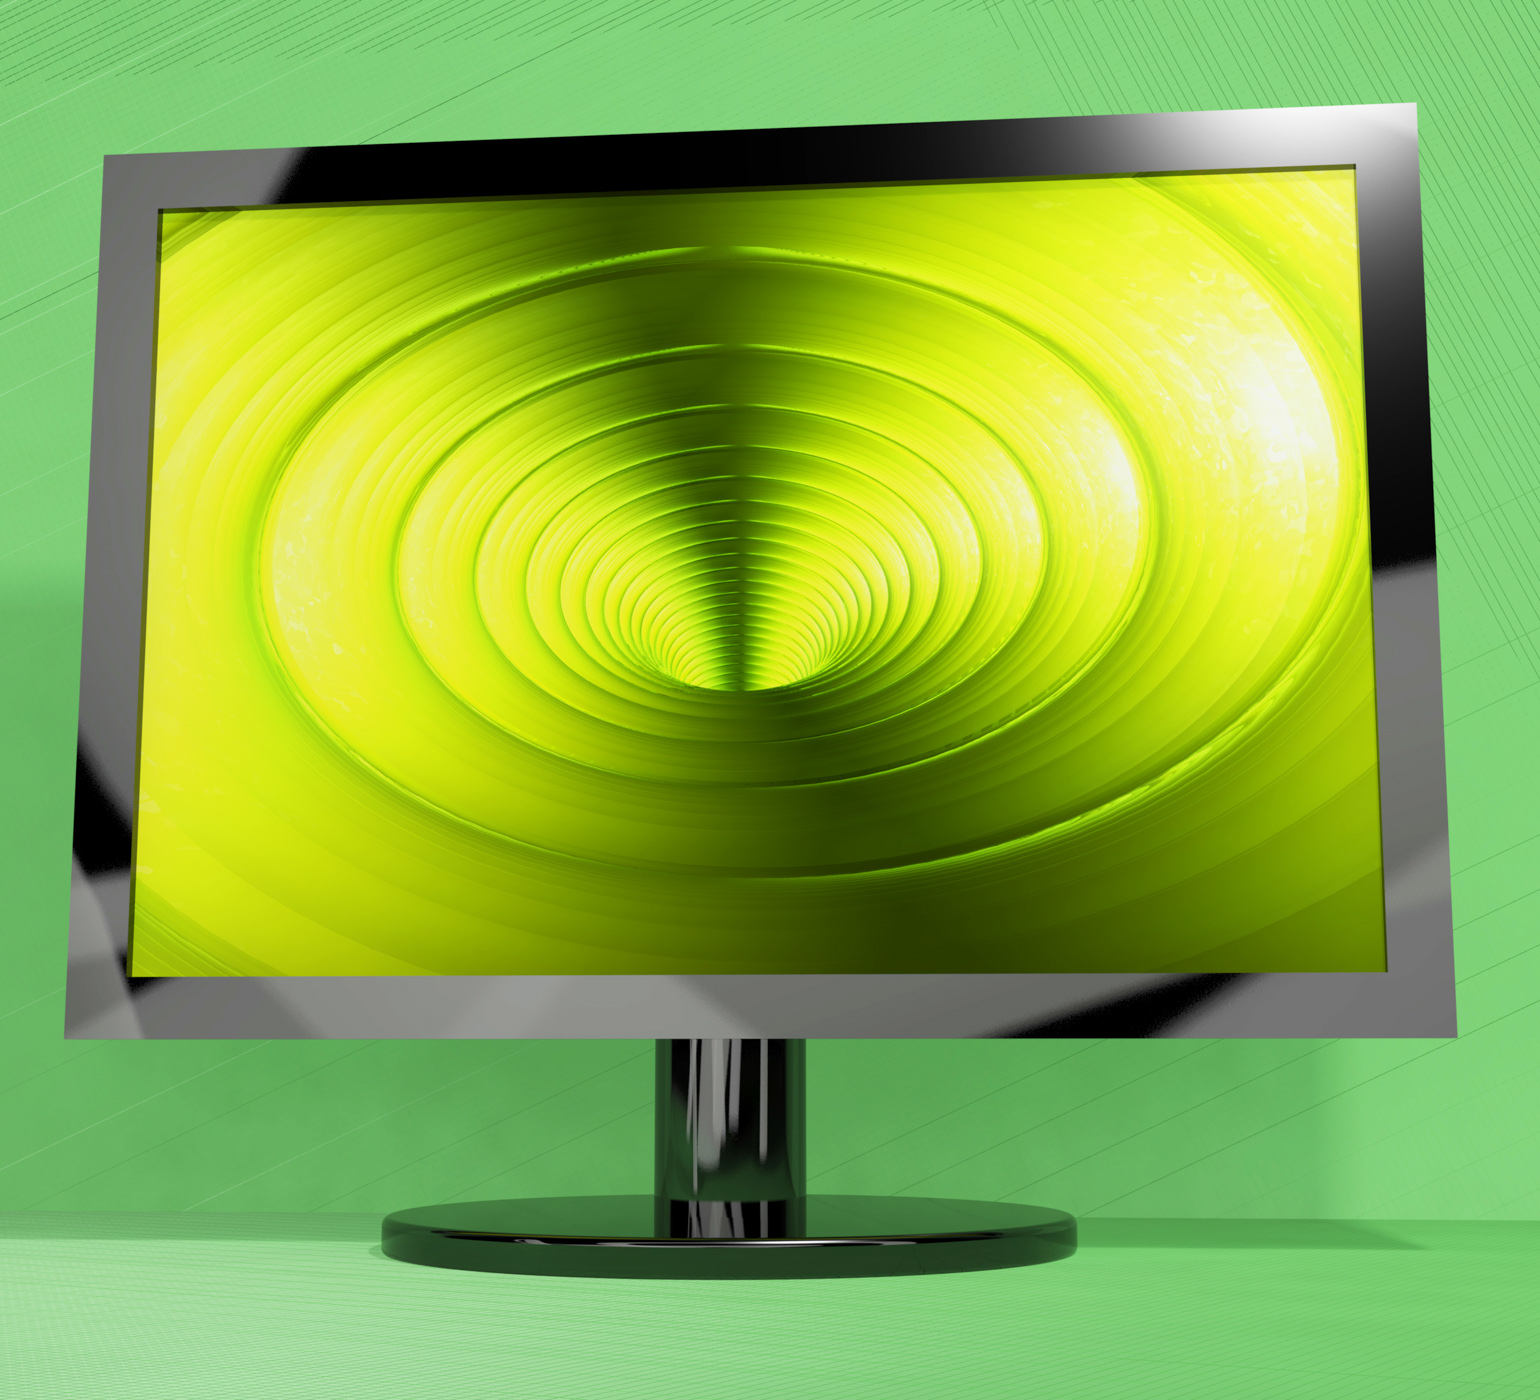 Tv monitor with vortex picture representing high definition television photo